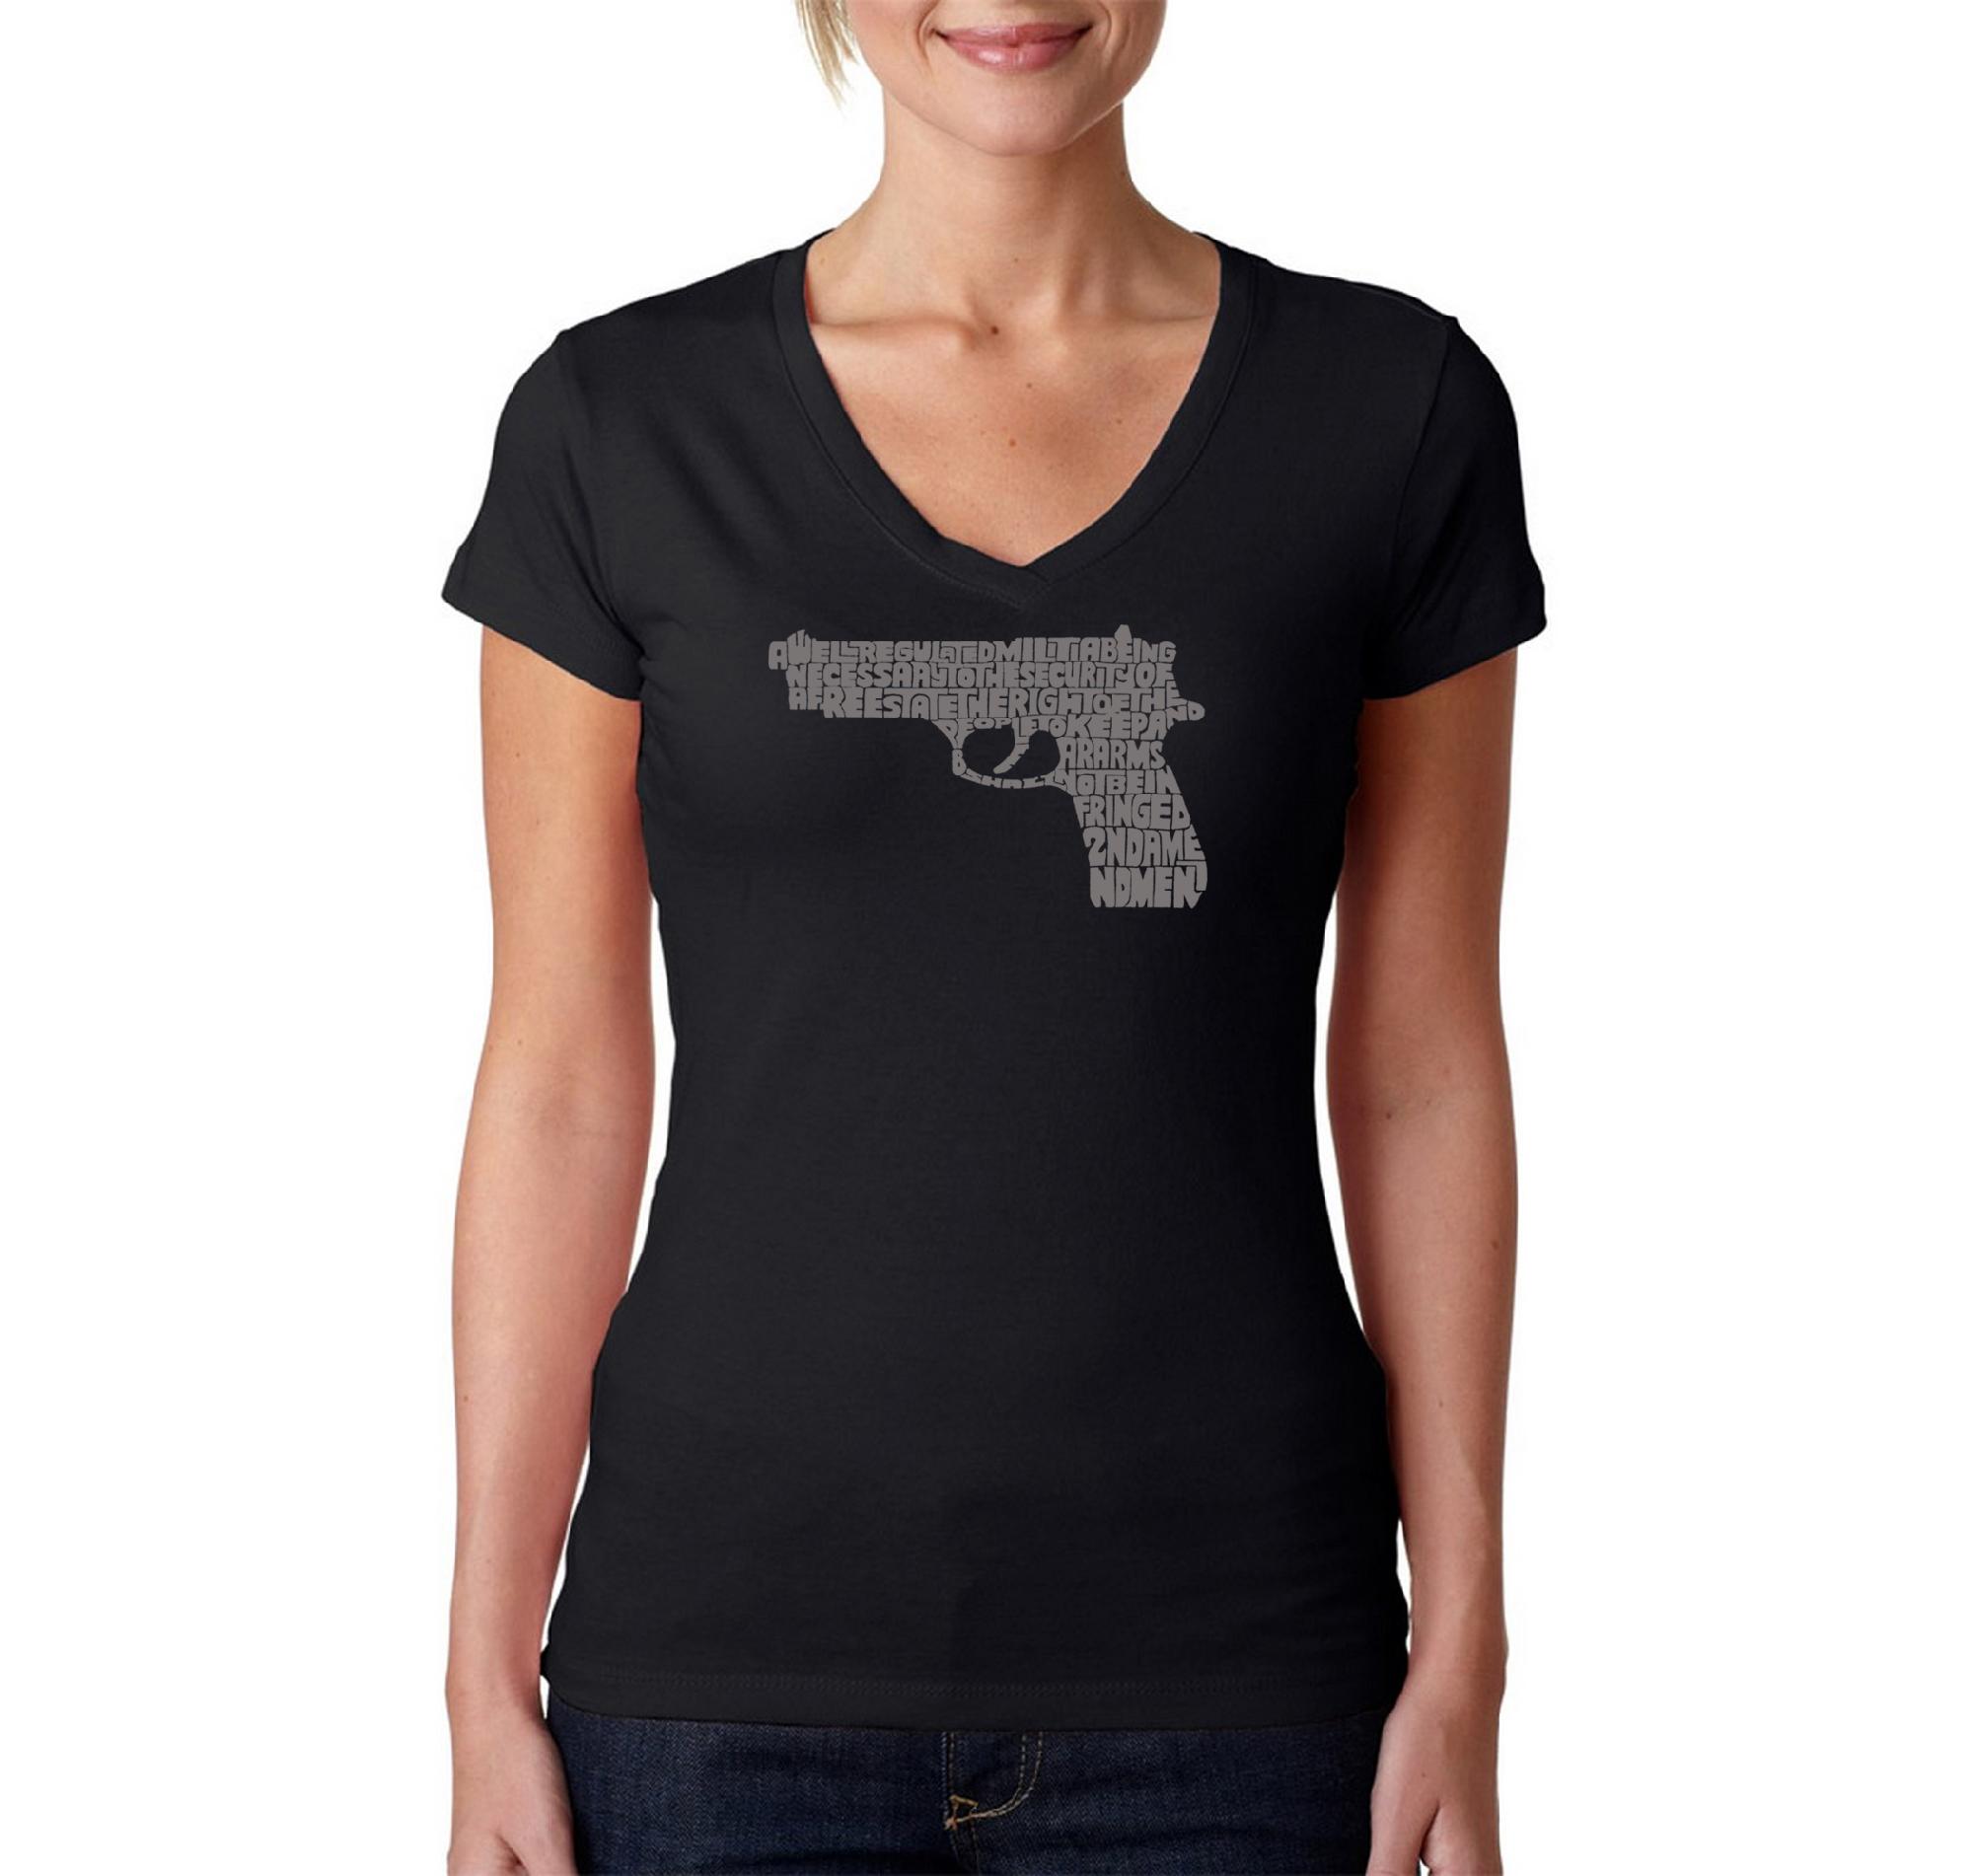 Los Angeles Pop Art Women's Word Art V-Neck T-shirt - The Right to Bear Arms